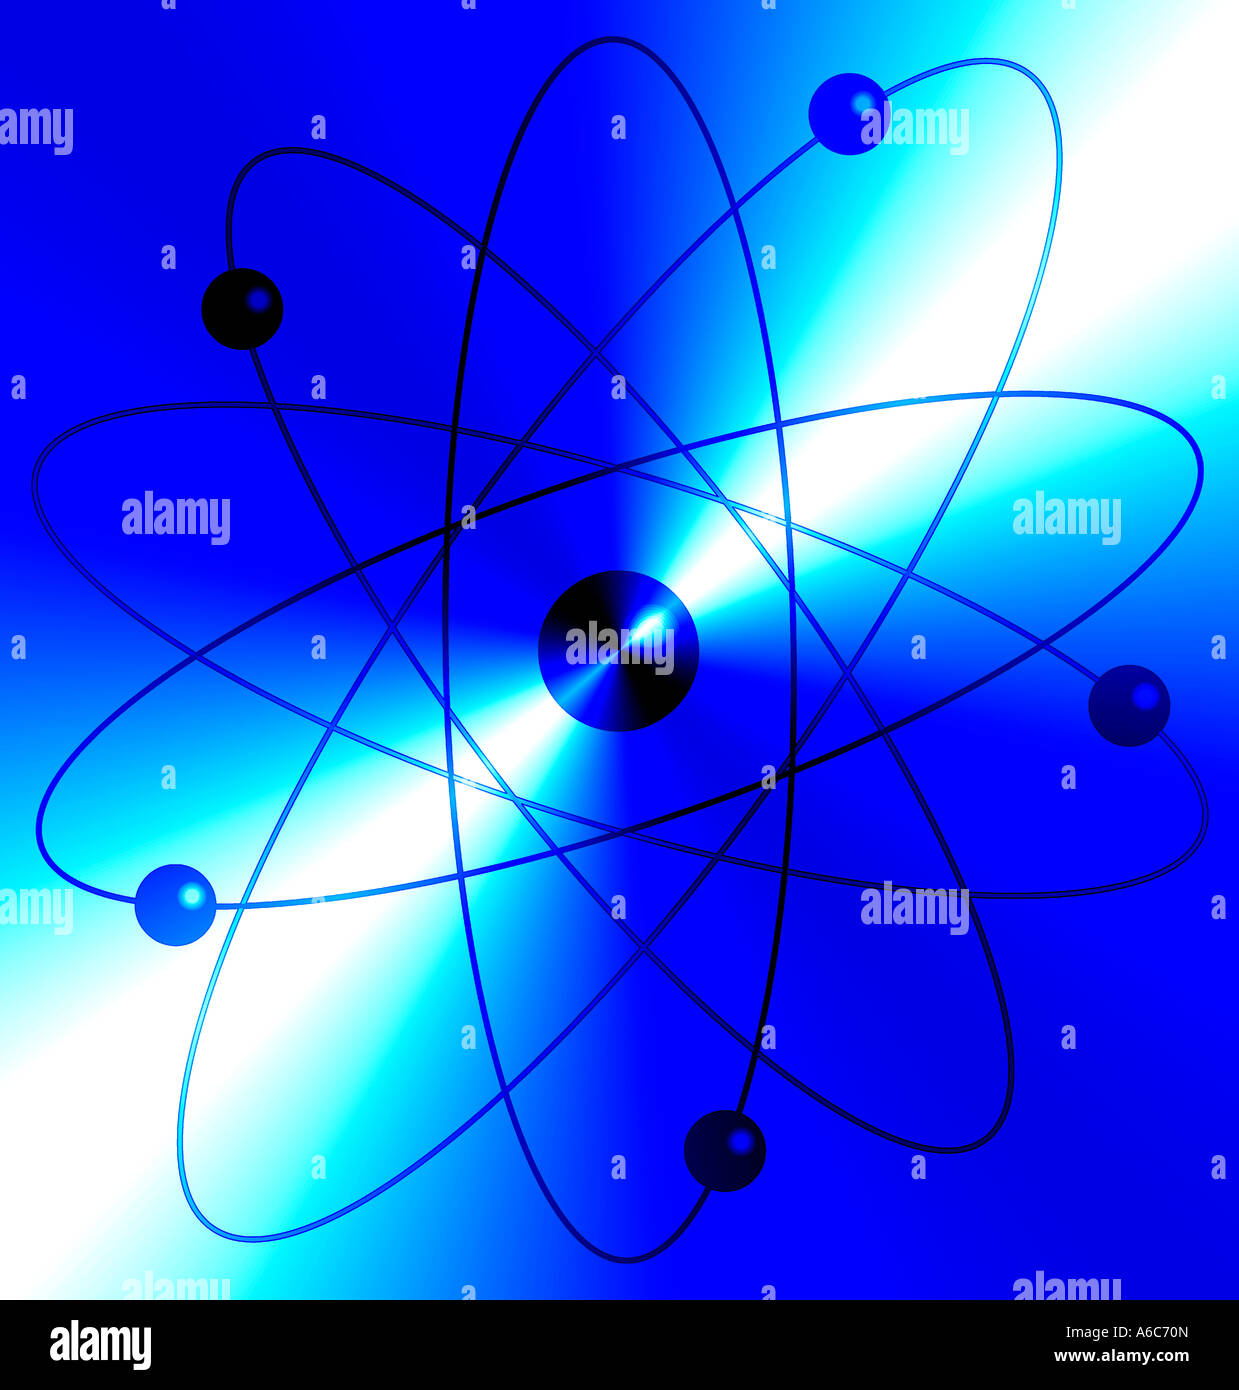 abstract view of the scientific atomic symbol Stock Photo